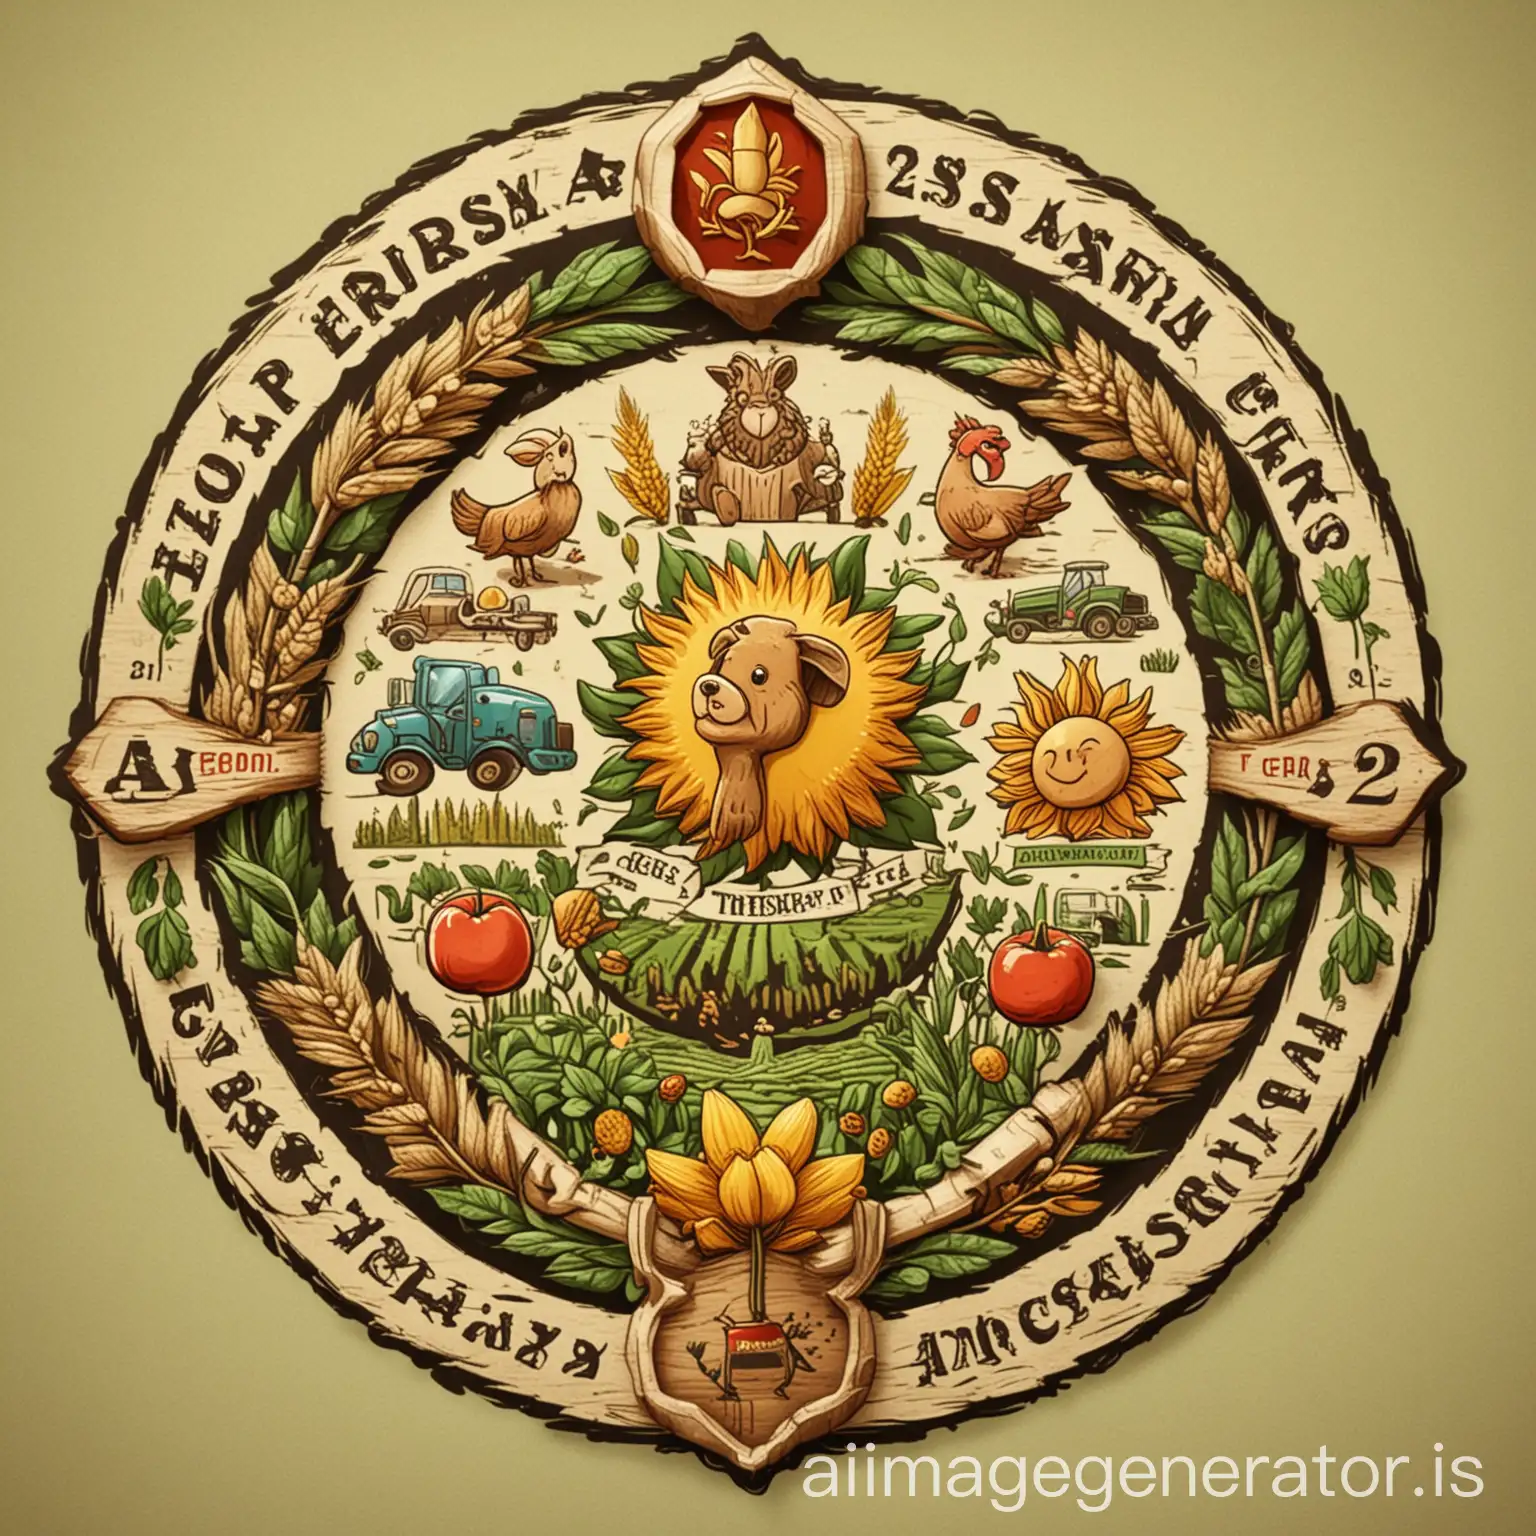 Help me design a class emblem, with the words ‘agrarian232’ in the center, include elements of agriculture, environment and cute animals, make the picture rich in elements with a cartoonish style